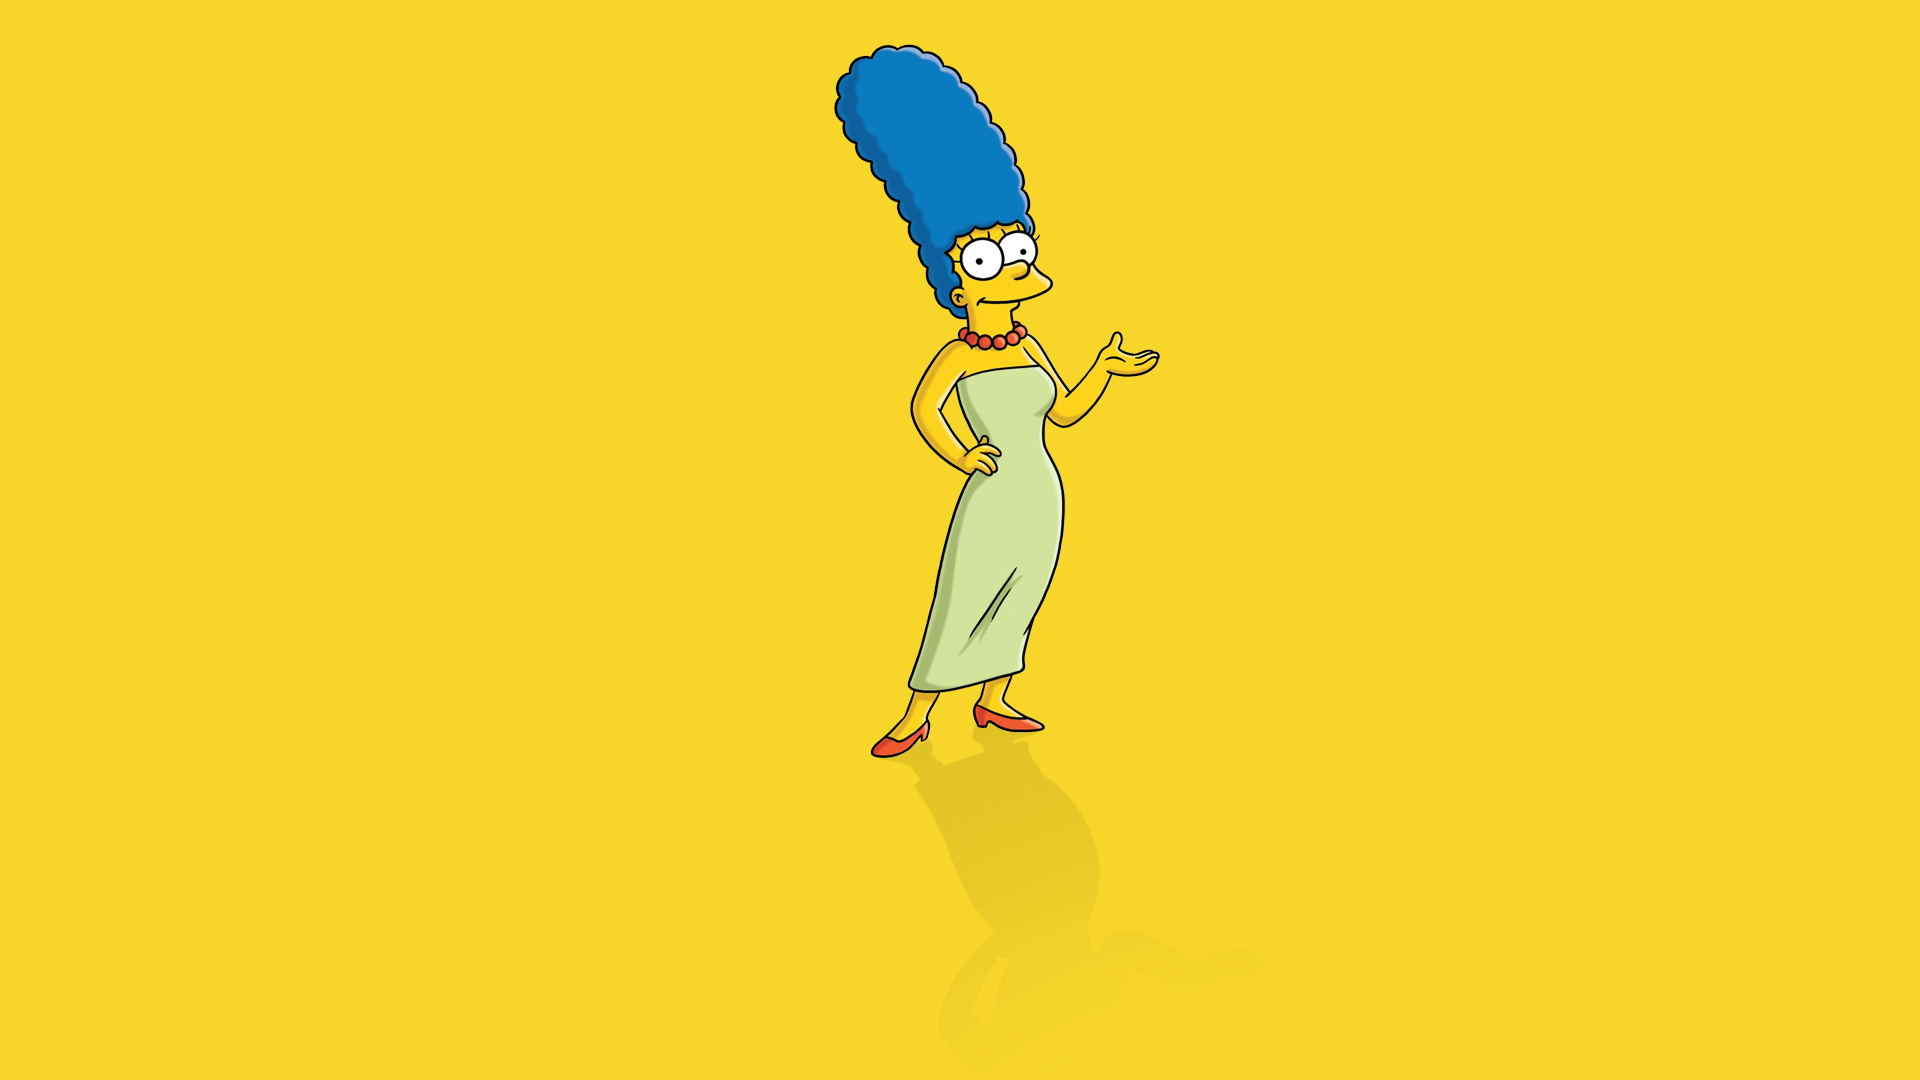 Marge Simpson   Wallpaper High Definition High Quality Widescreen 1920x1080